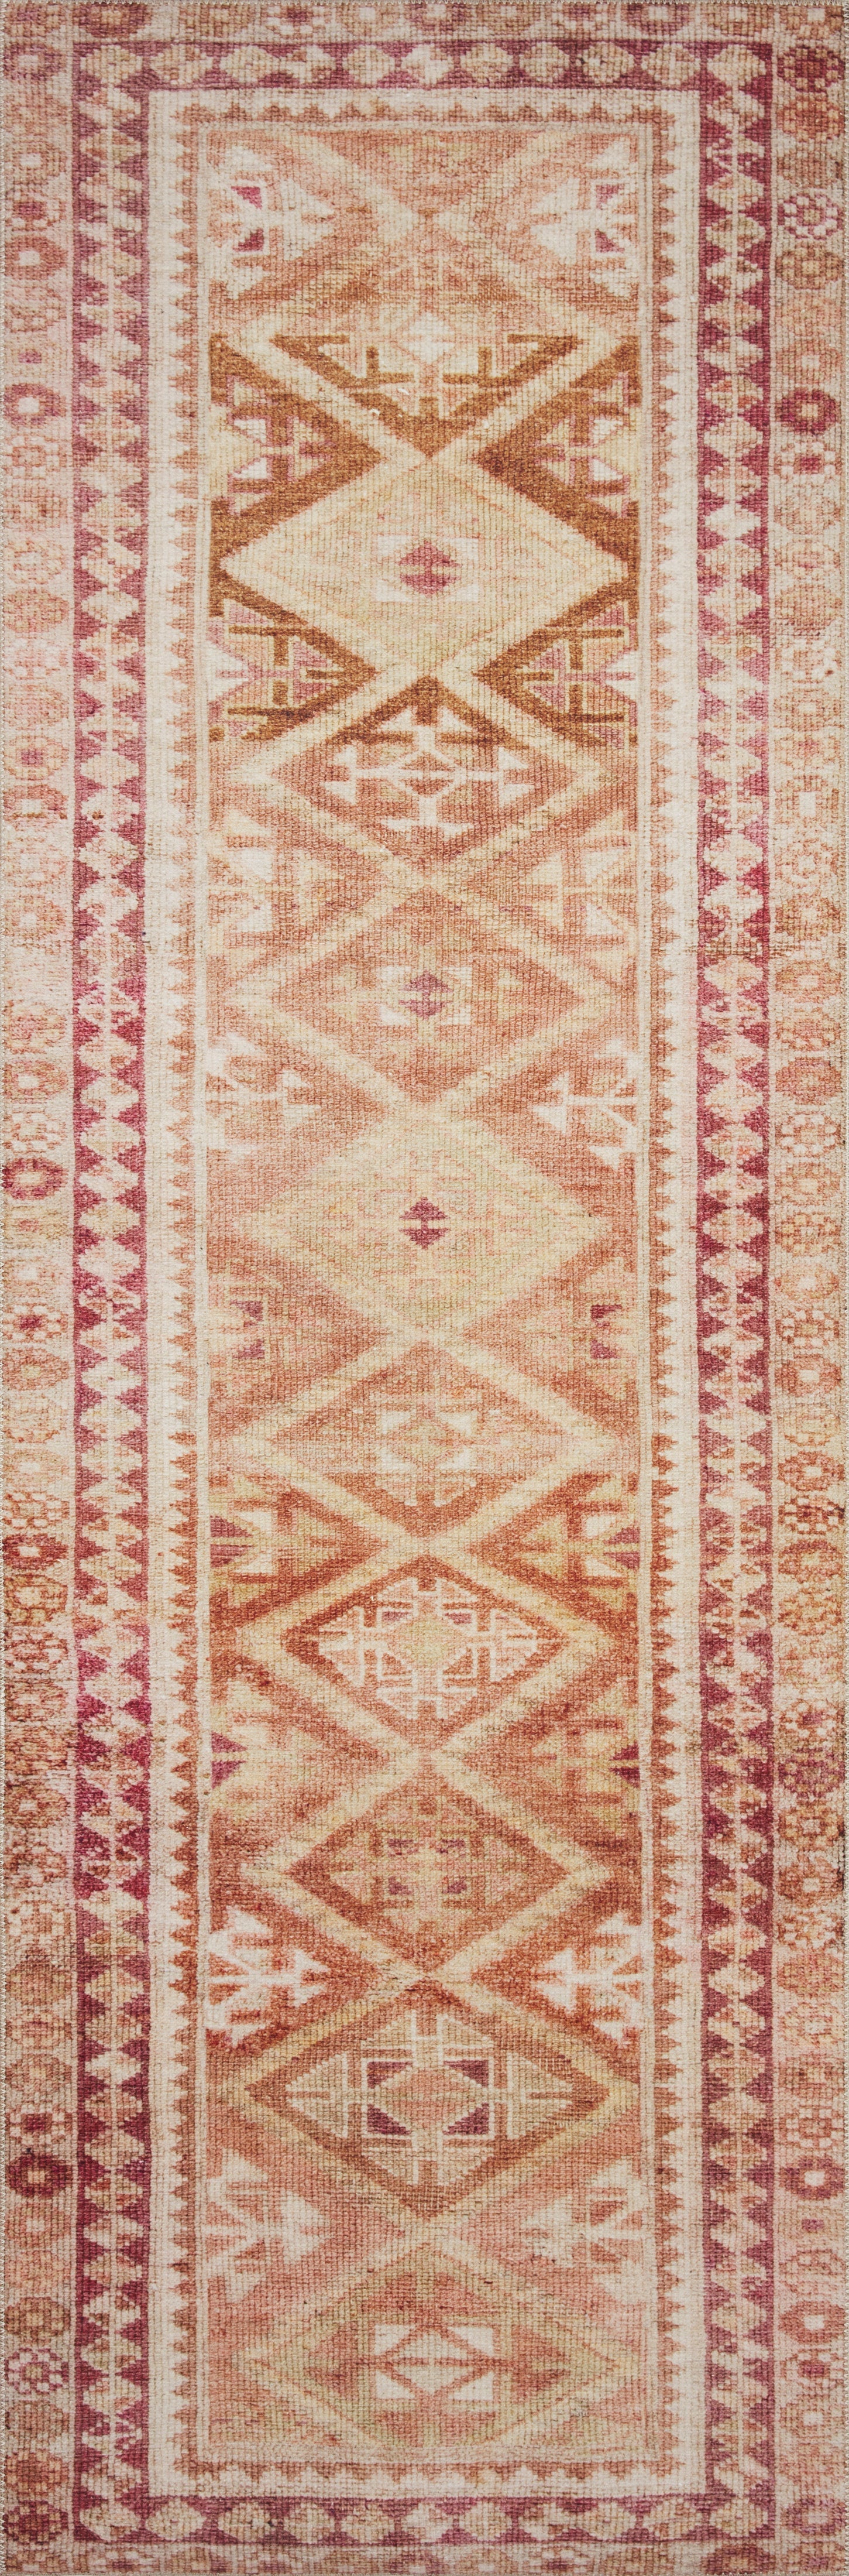 Layla Natural/Spice Rug